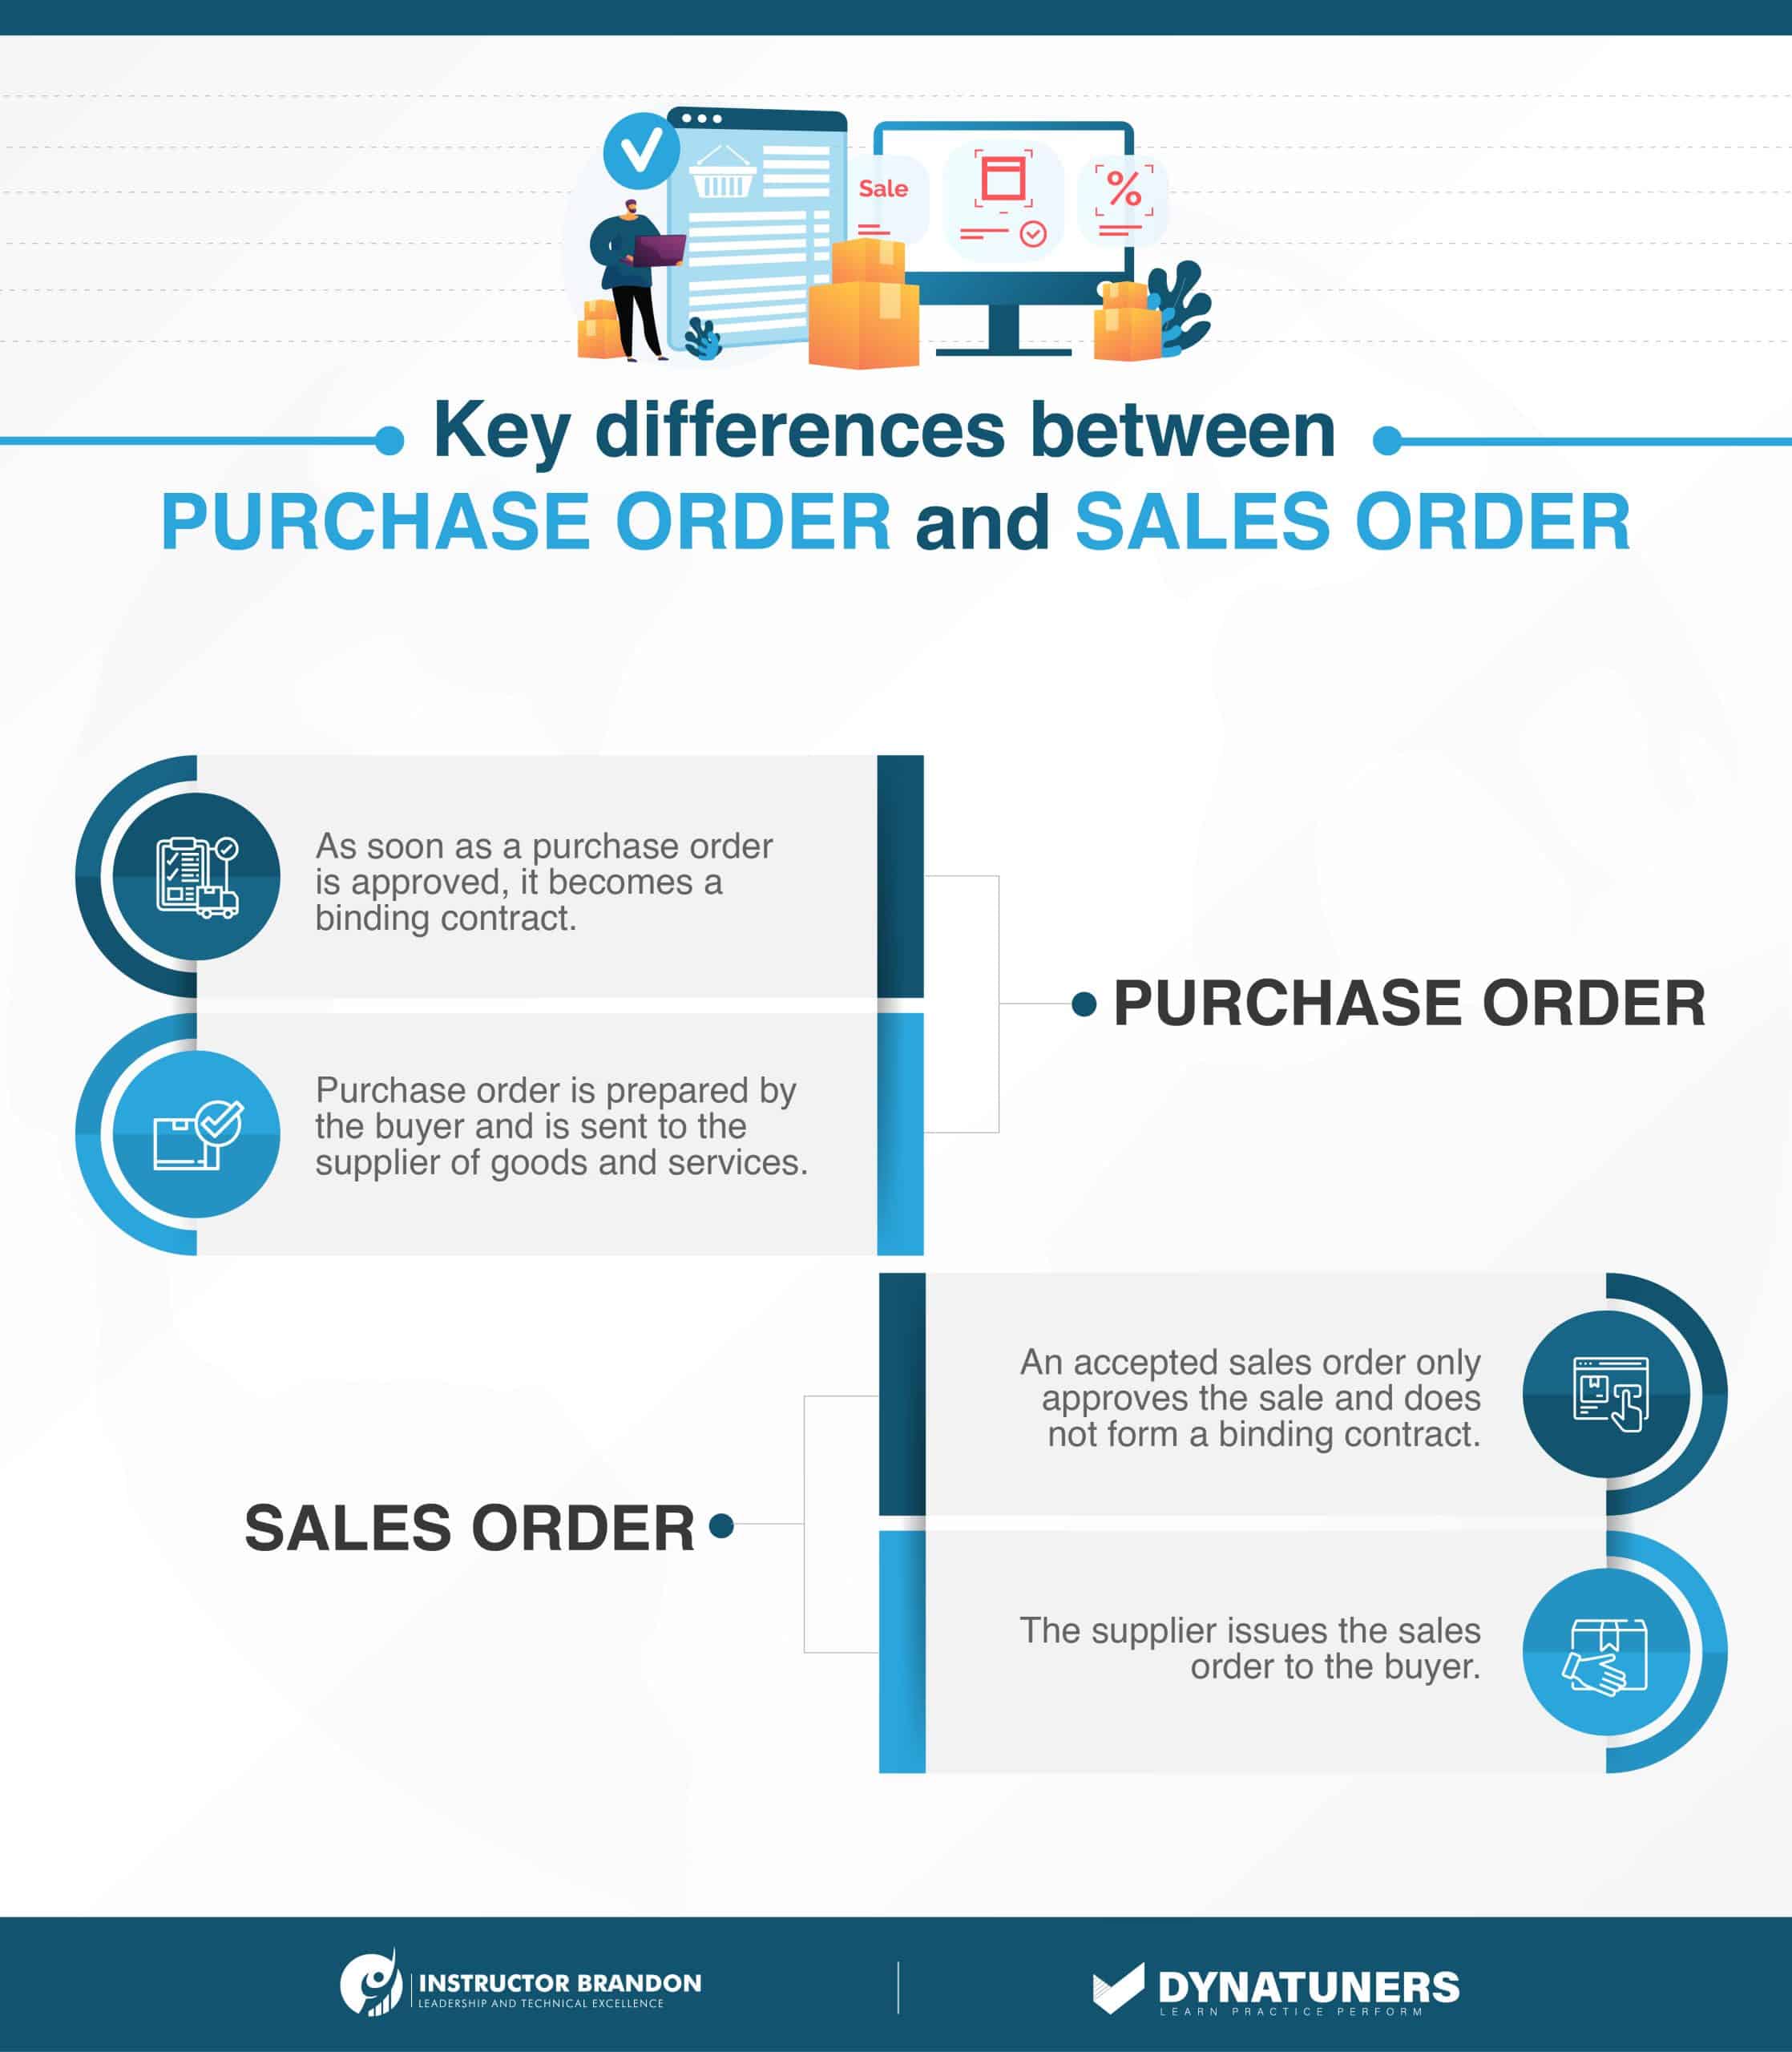 purchase order and sales order differences